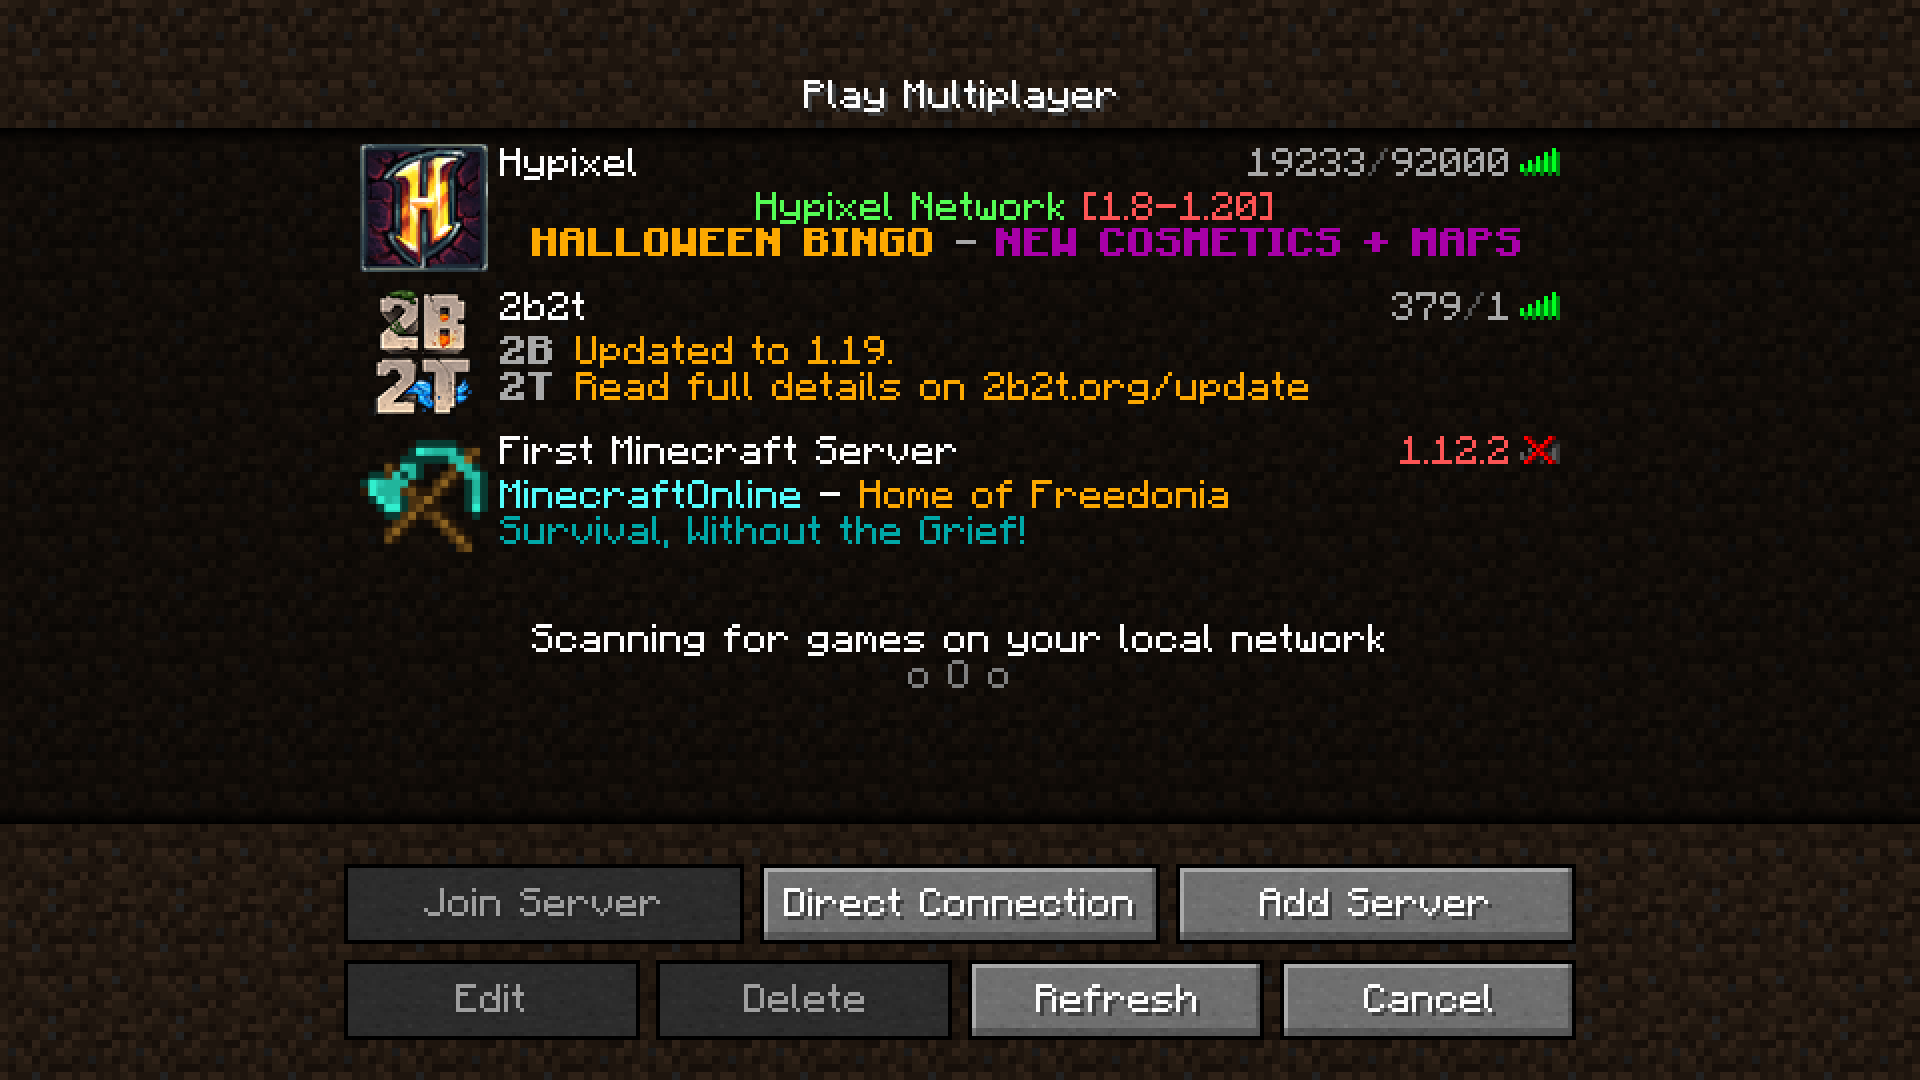 With this modpack you can play on any vanilla servers